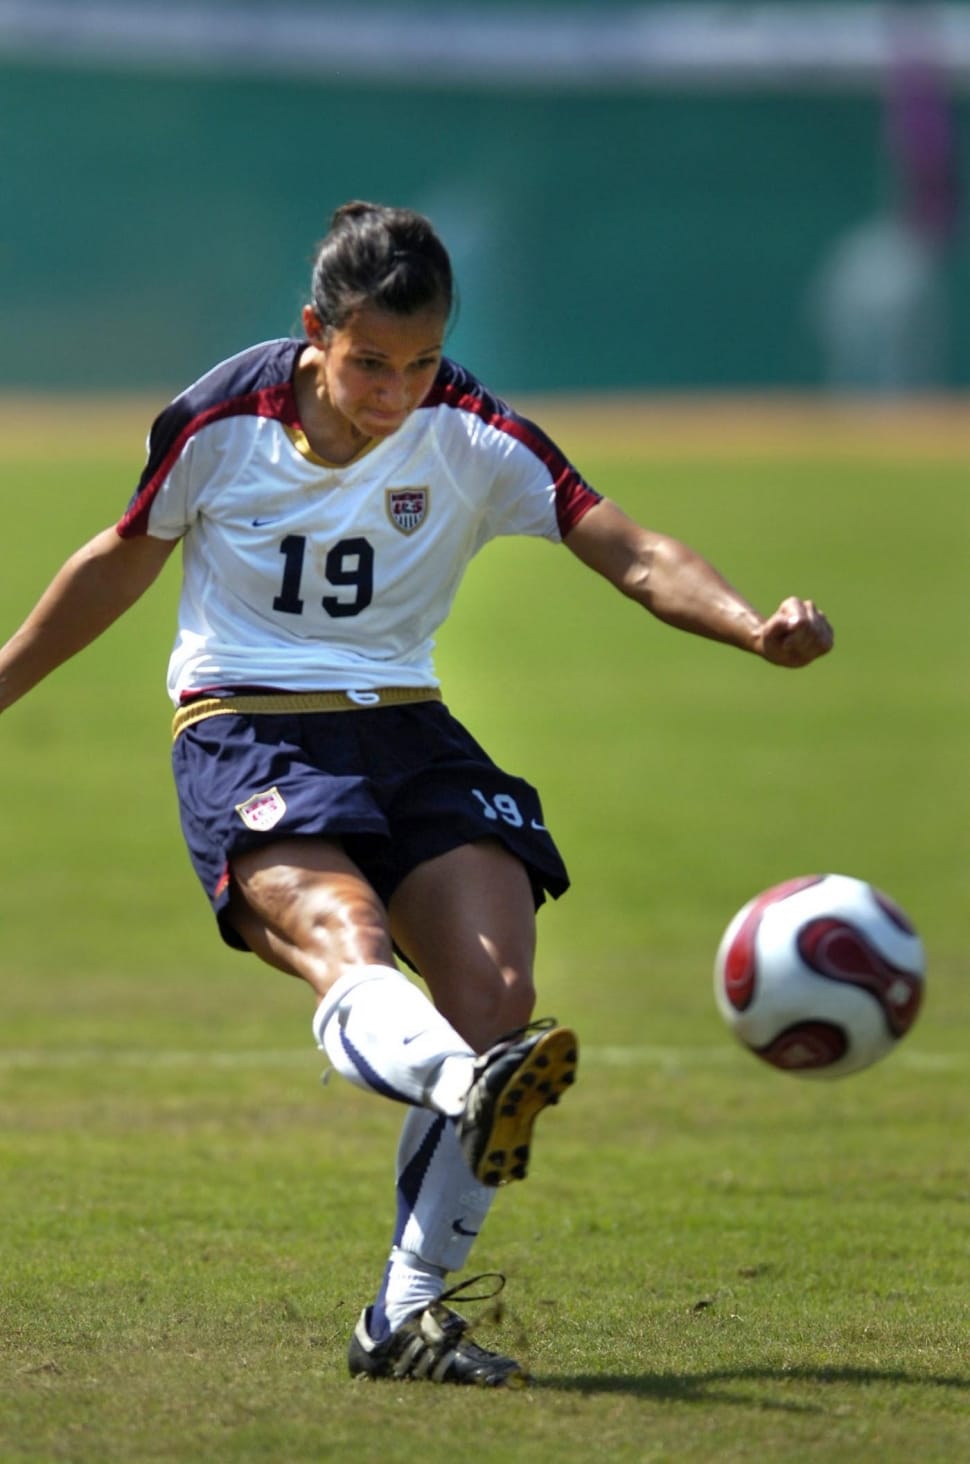 Soccer, Practice, Ball, Woman, Kicking, sport, competition preview